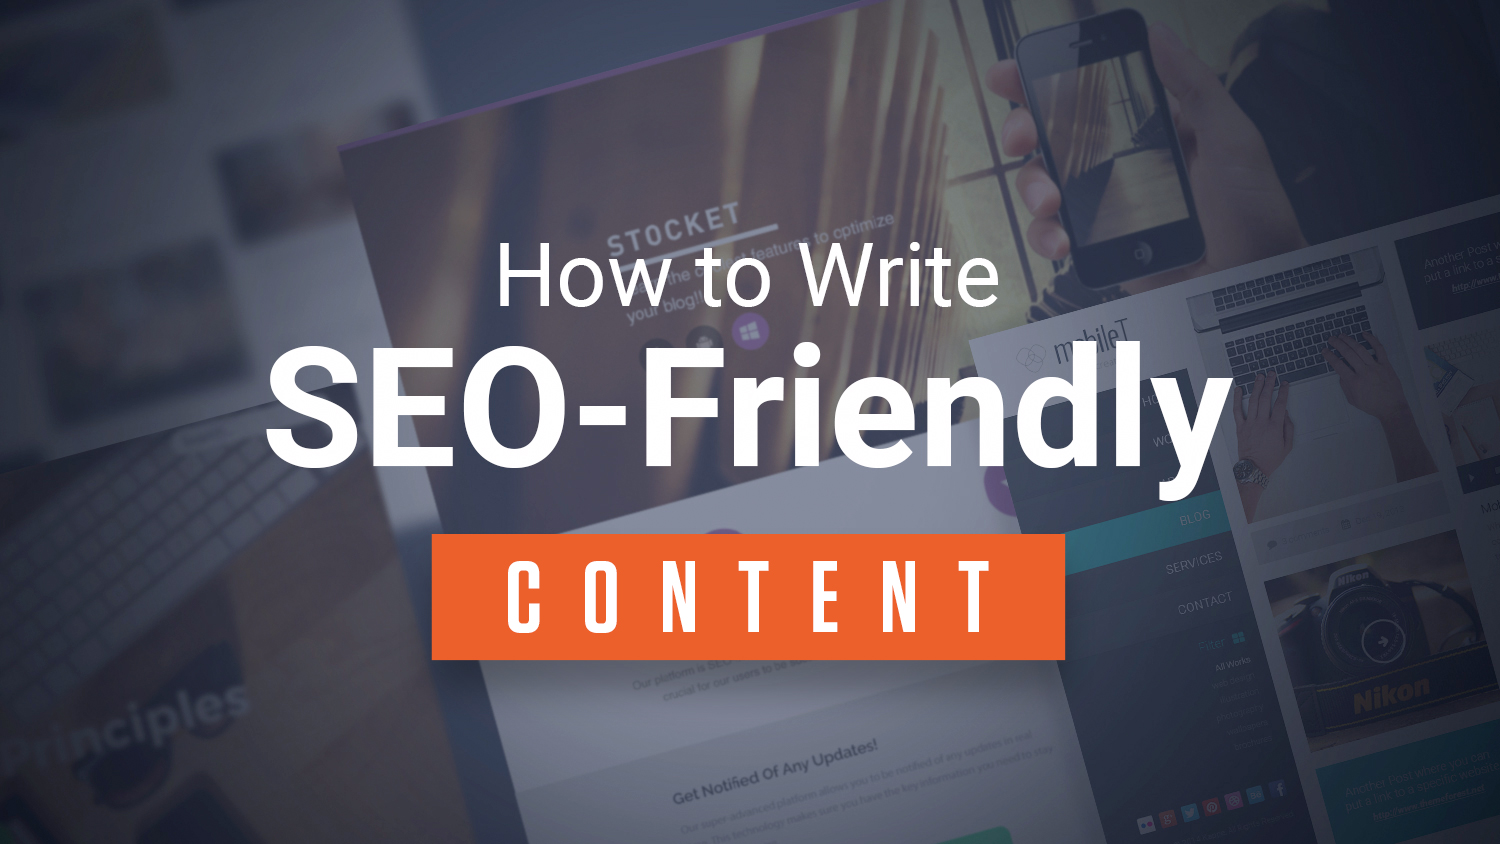 20 Tips to Write SEO Friendly Content to Rank Your Site